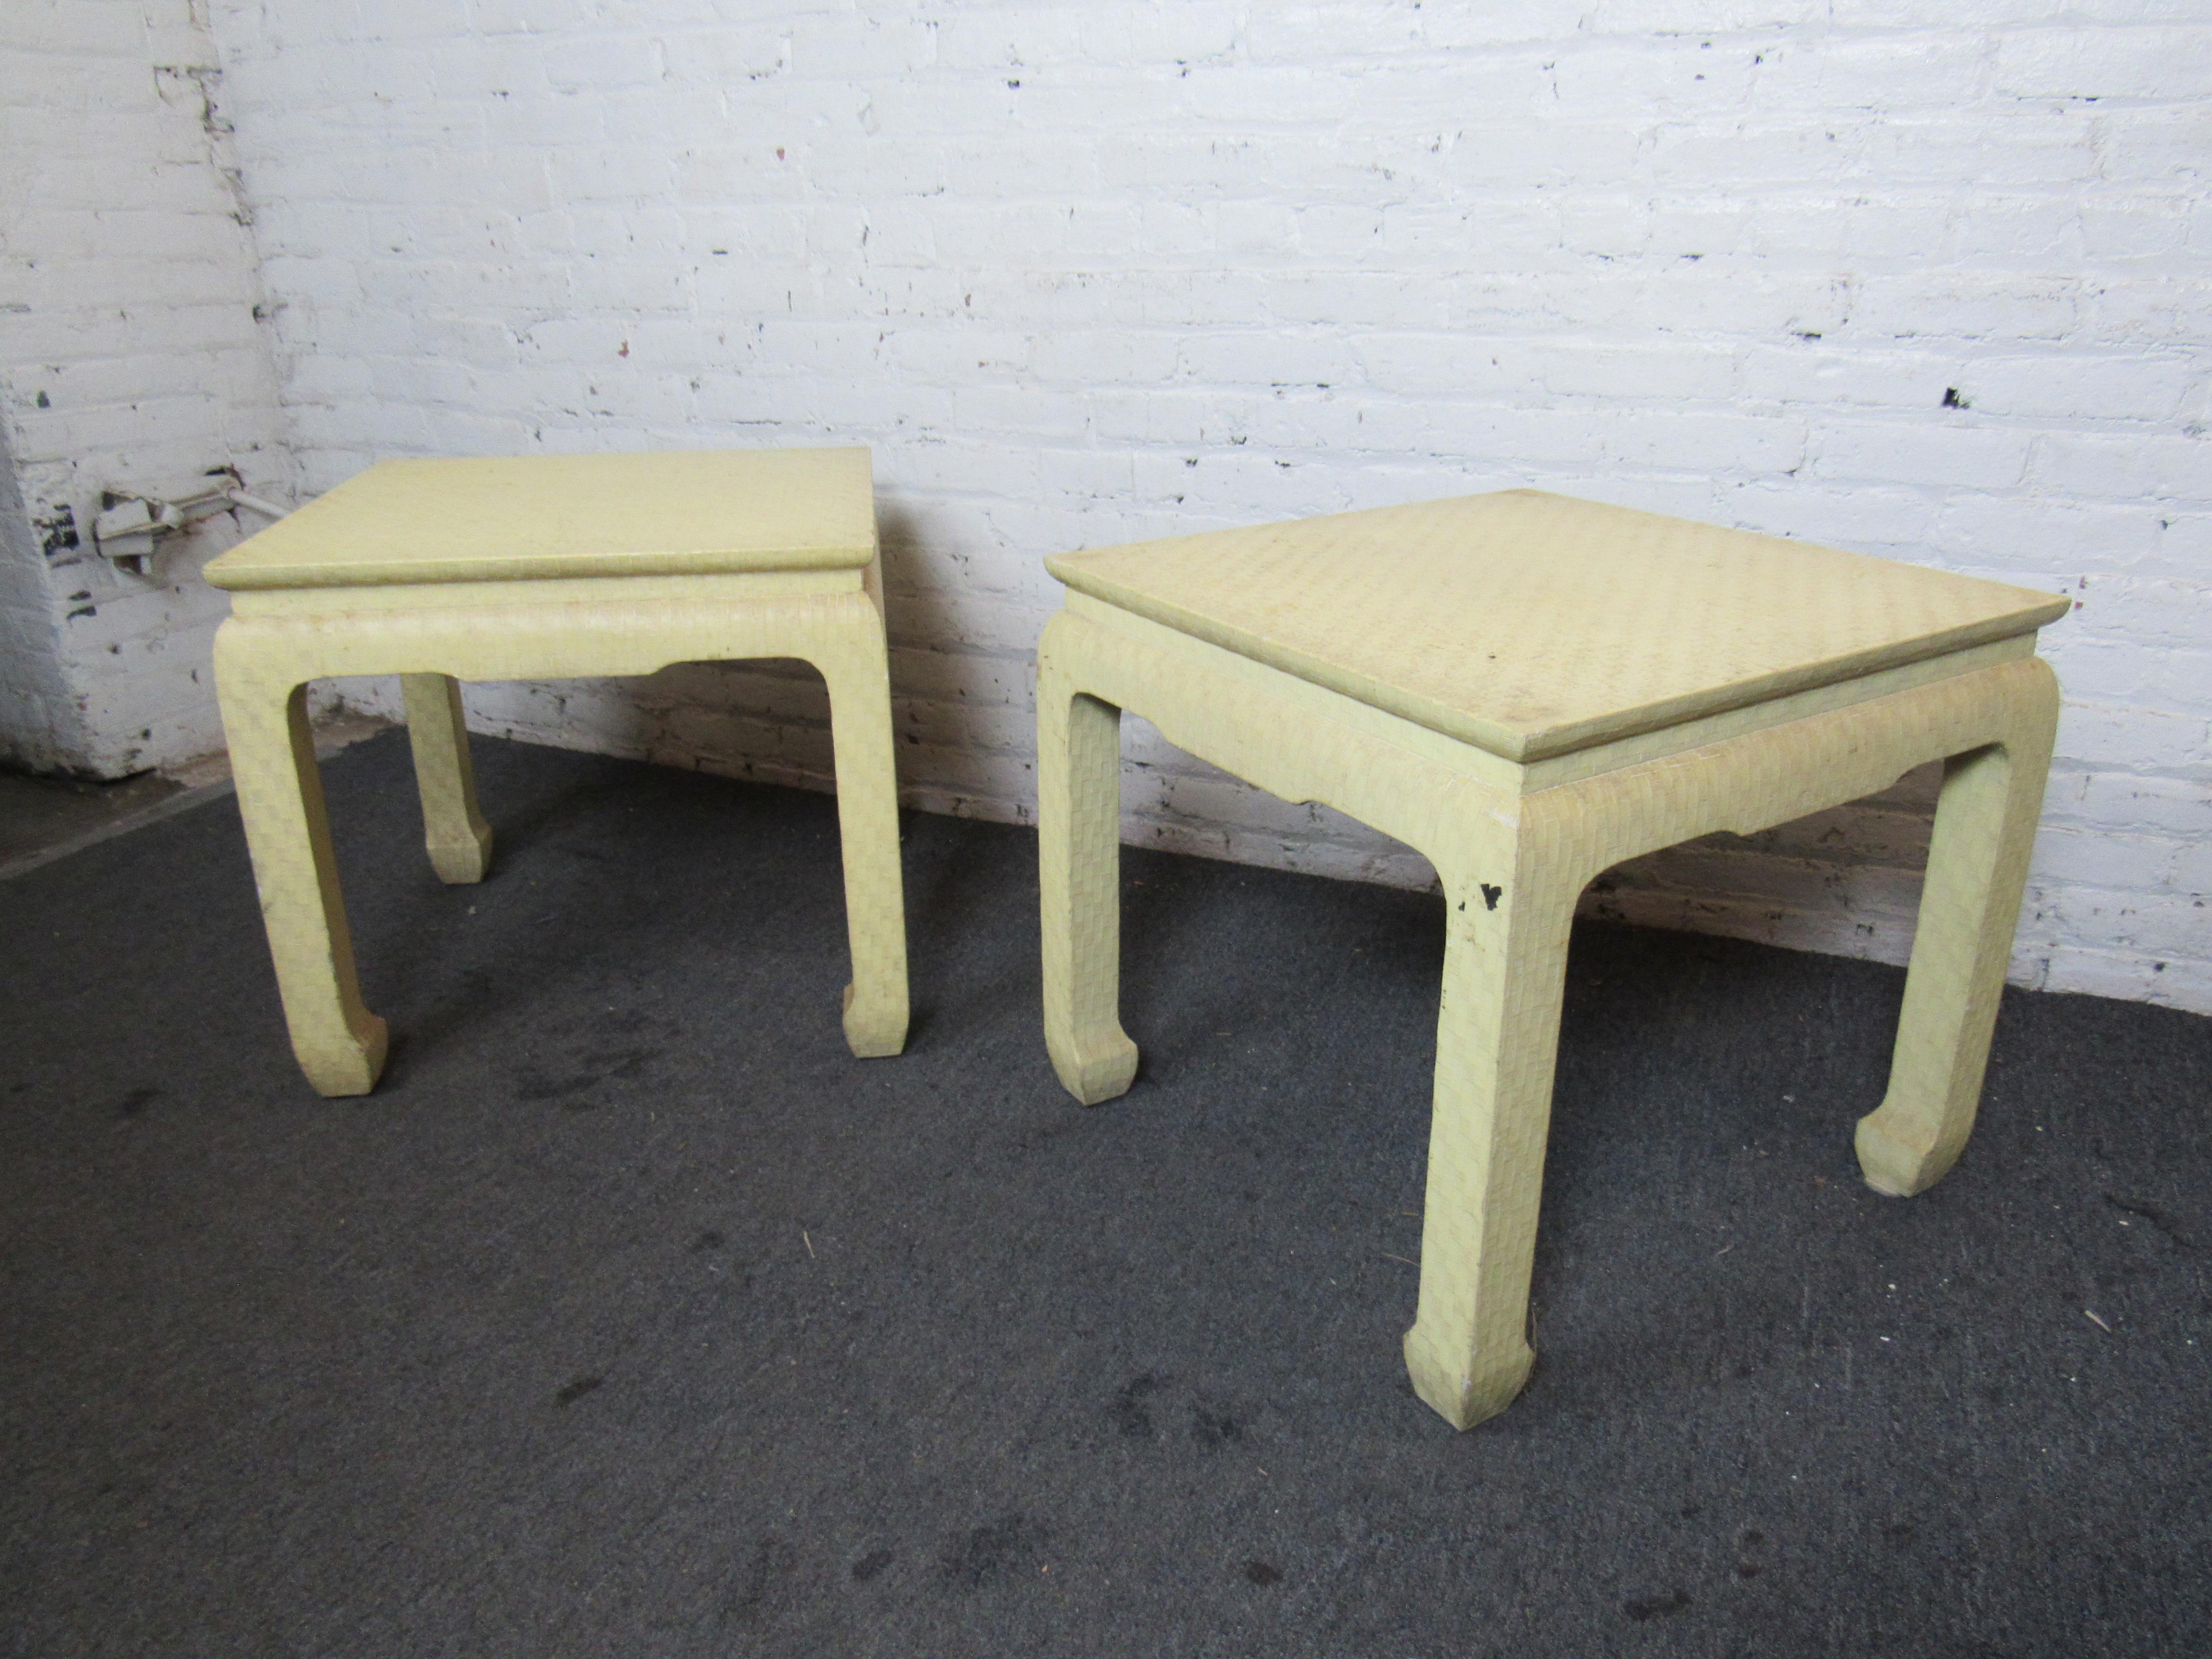 With a unique textured surface and understated cream color, this pair of vintage side tables by Baker Furniture is perfect for adding Mid-Century style to any interior.